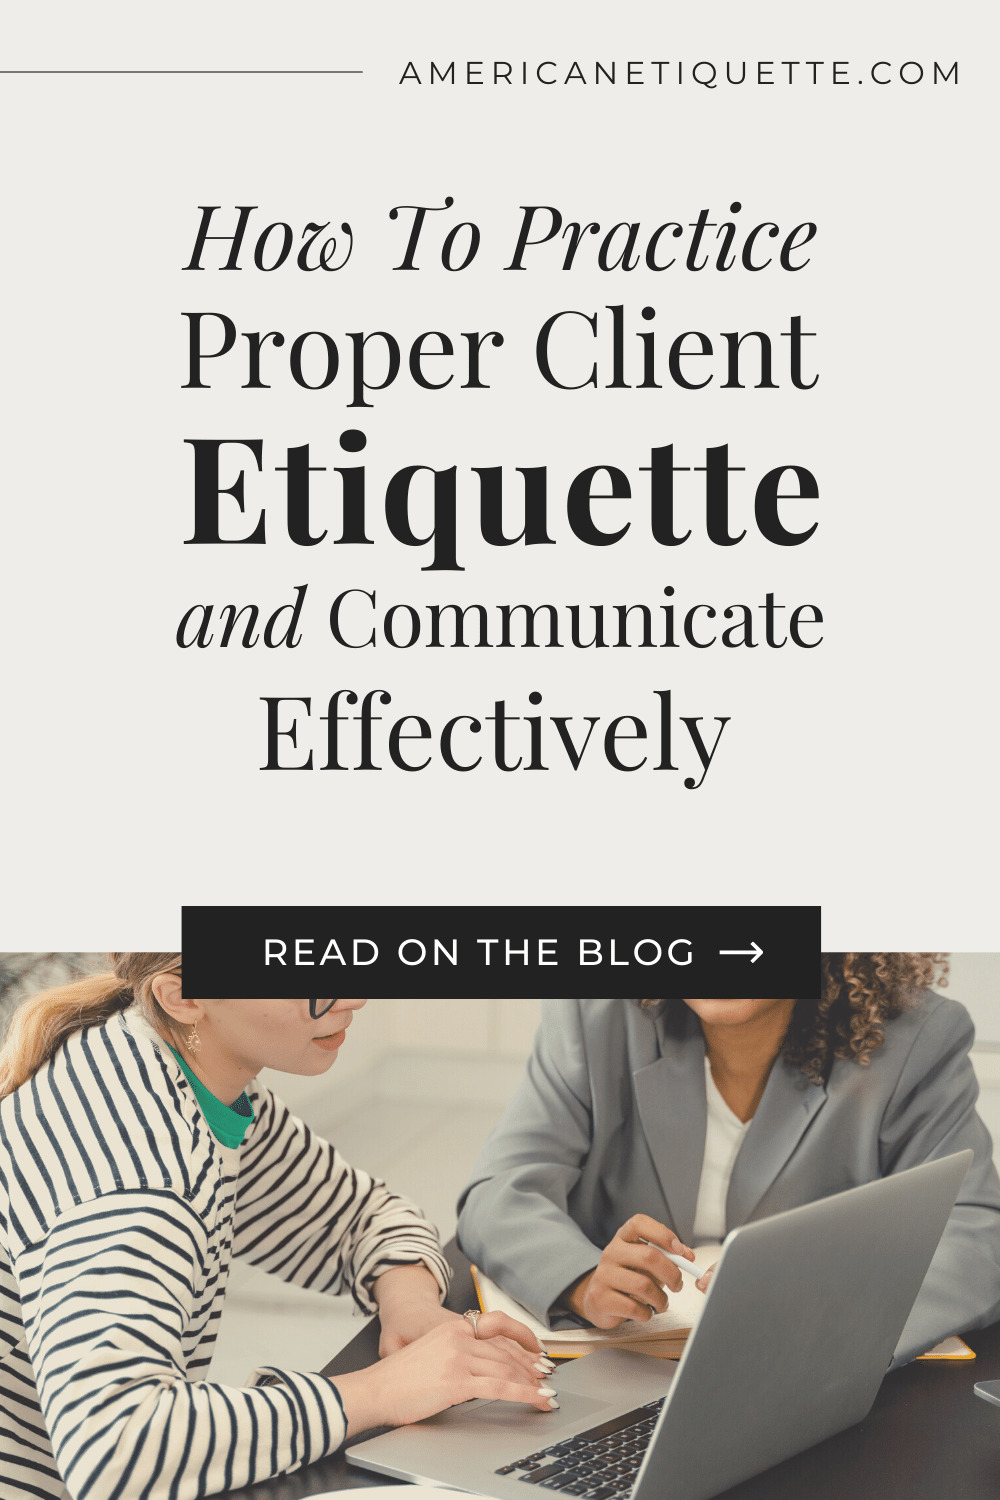 How To Practice Proper Client Etiquette And Communicate Effectively | American Etiquette